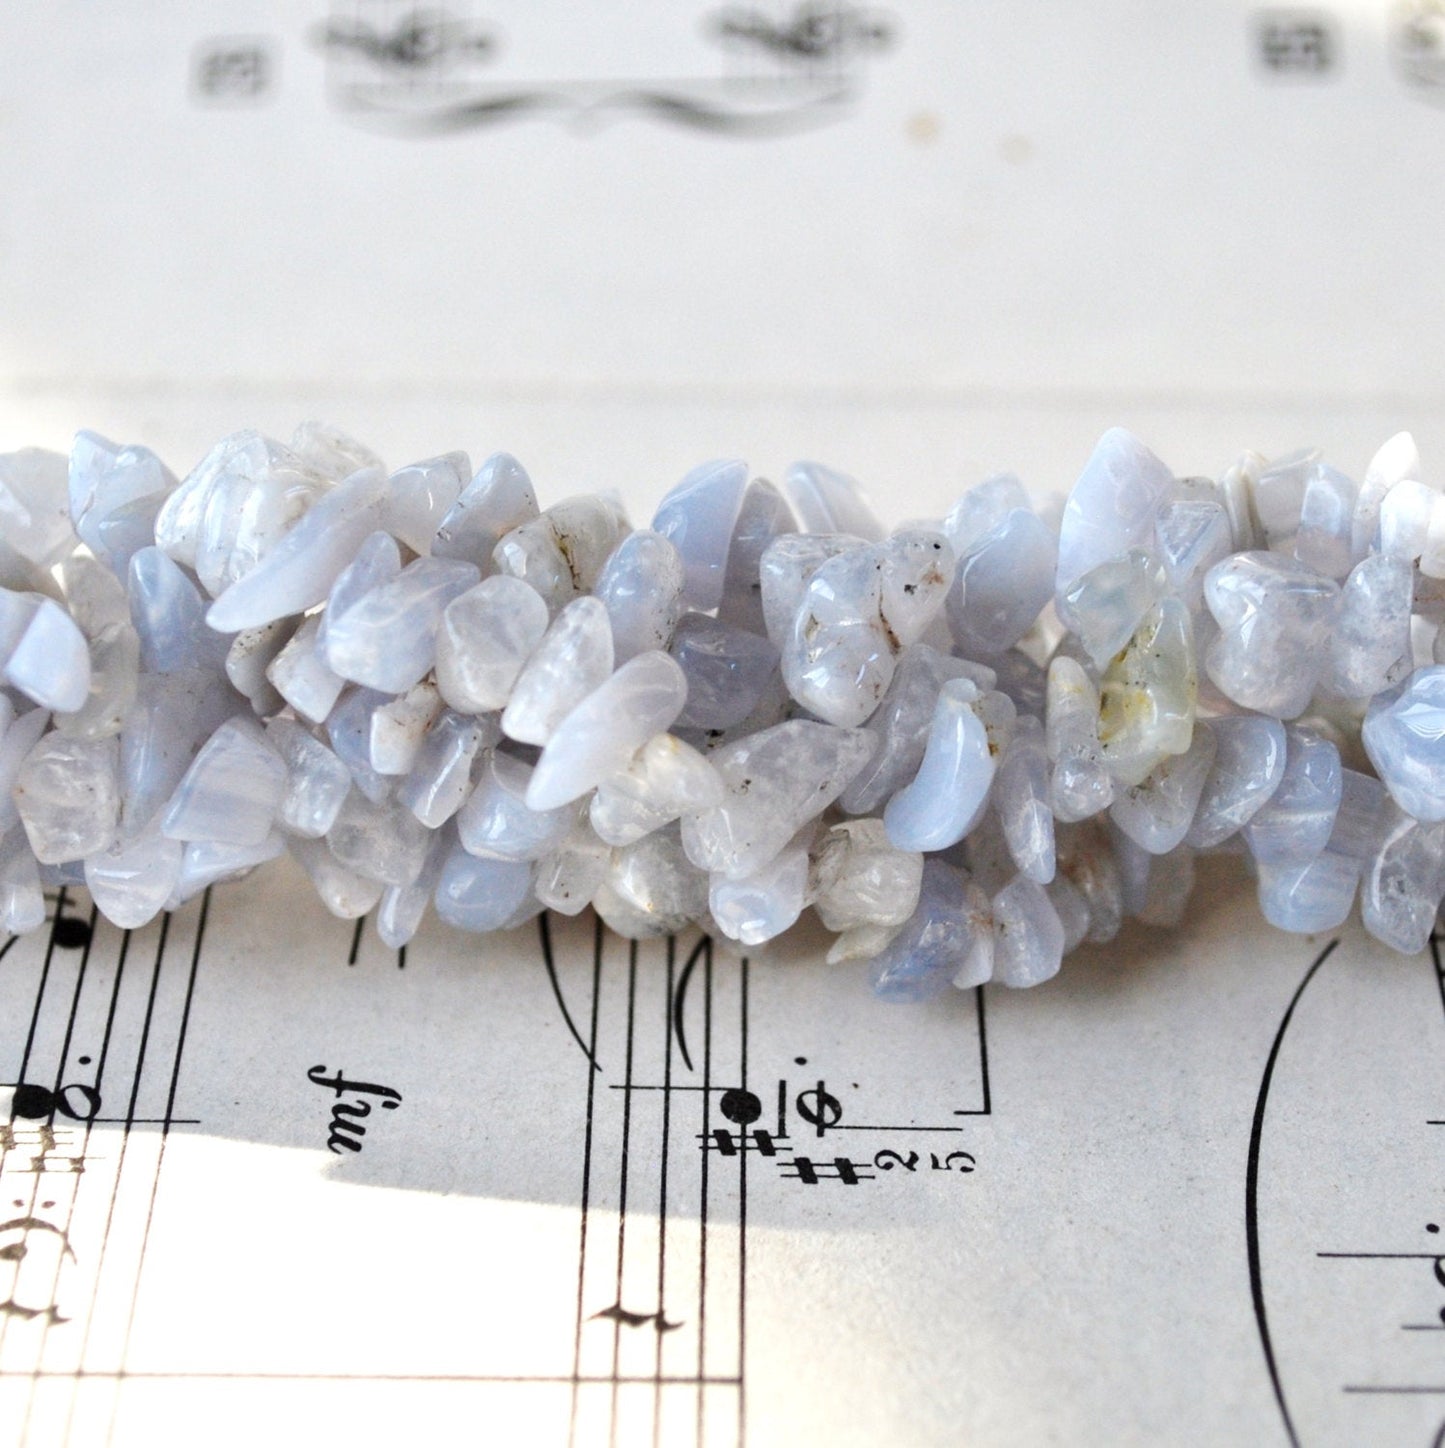 Blue Lace Agate Chip Beads Natural Soft Pastel Almost Lavender Colored Blue Gemstone Bead Lot 34" Bulk Strand For DIY Jewelry Making Crafts